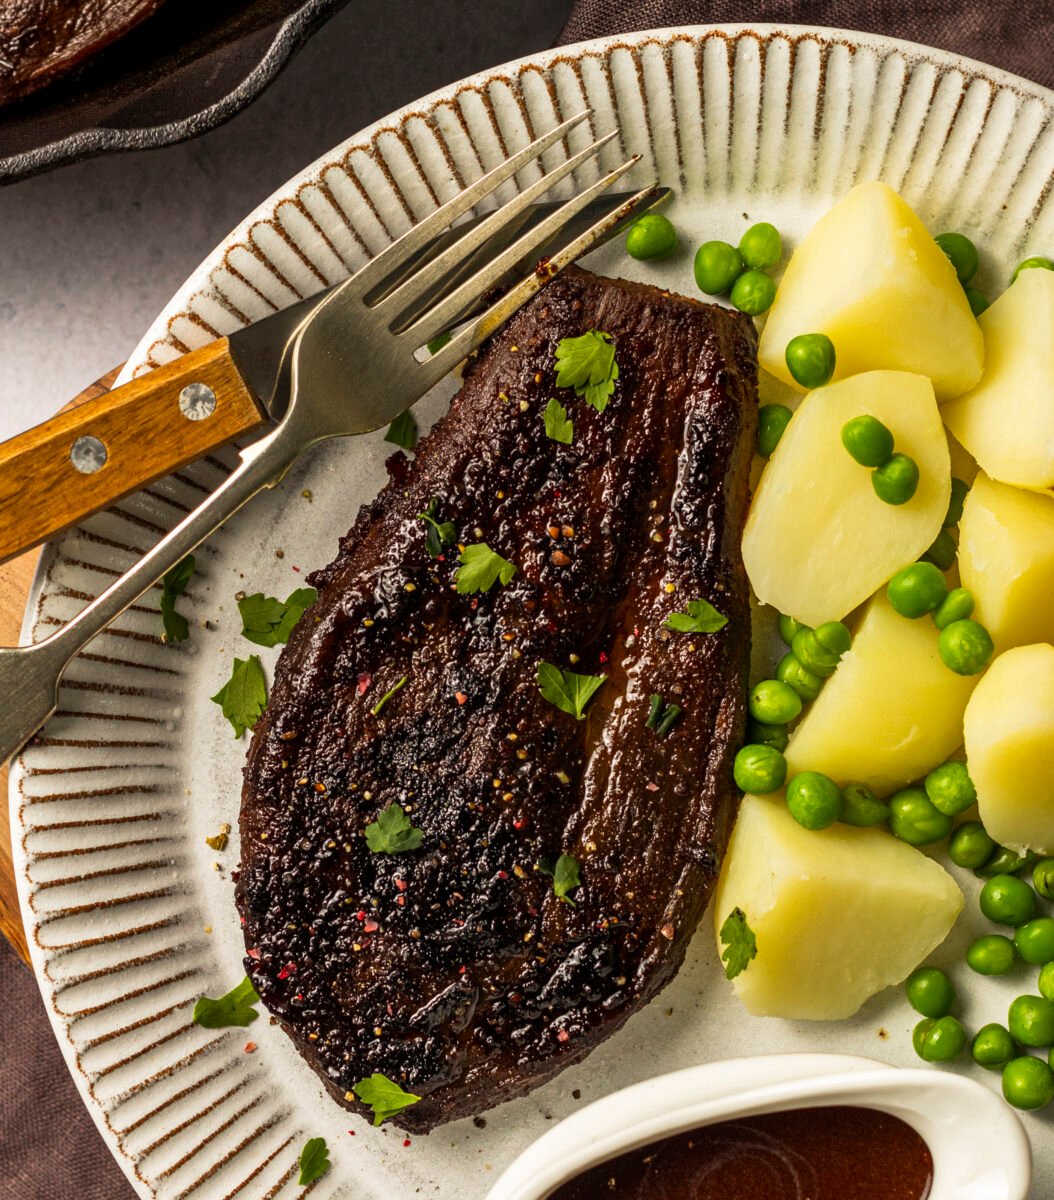 a roasted eggplant steak next to some potatoes and peas